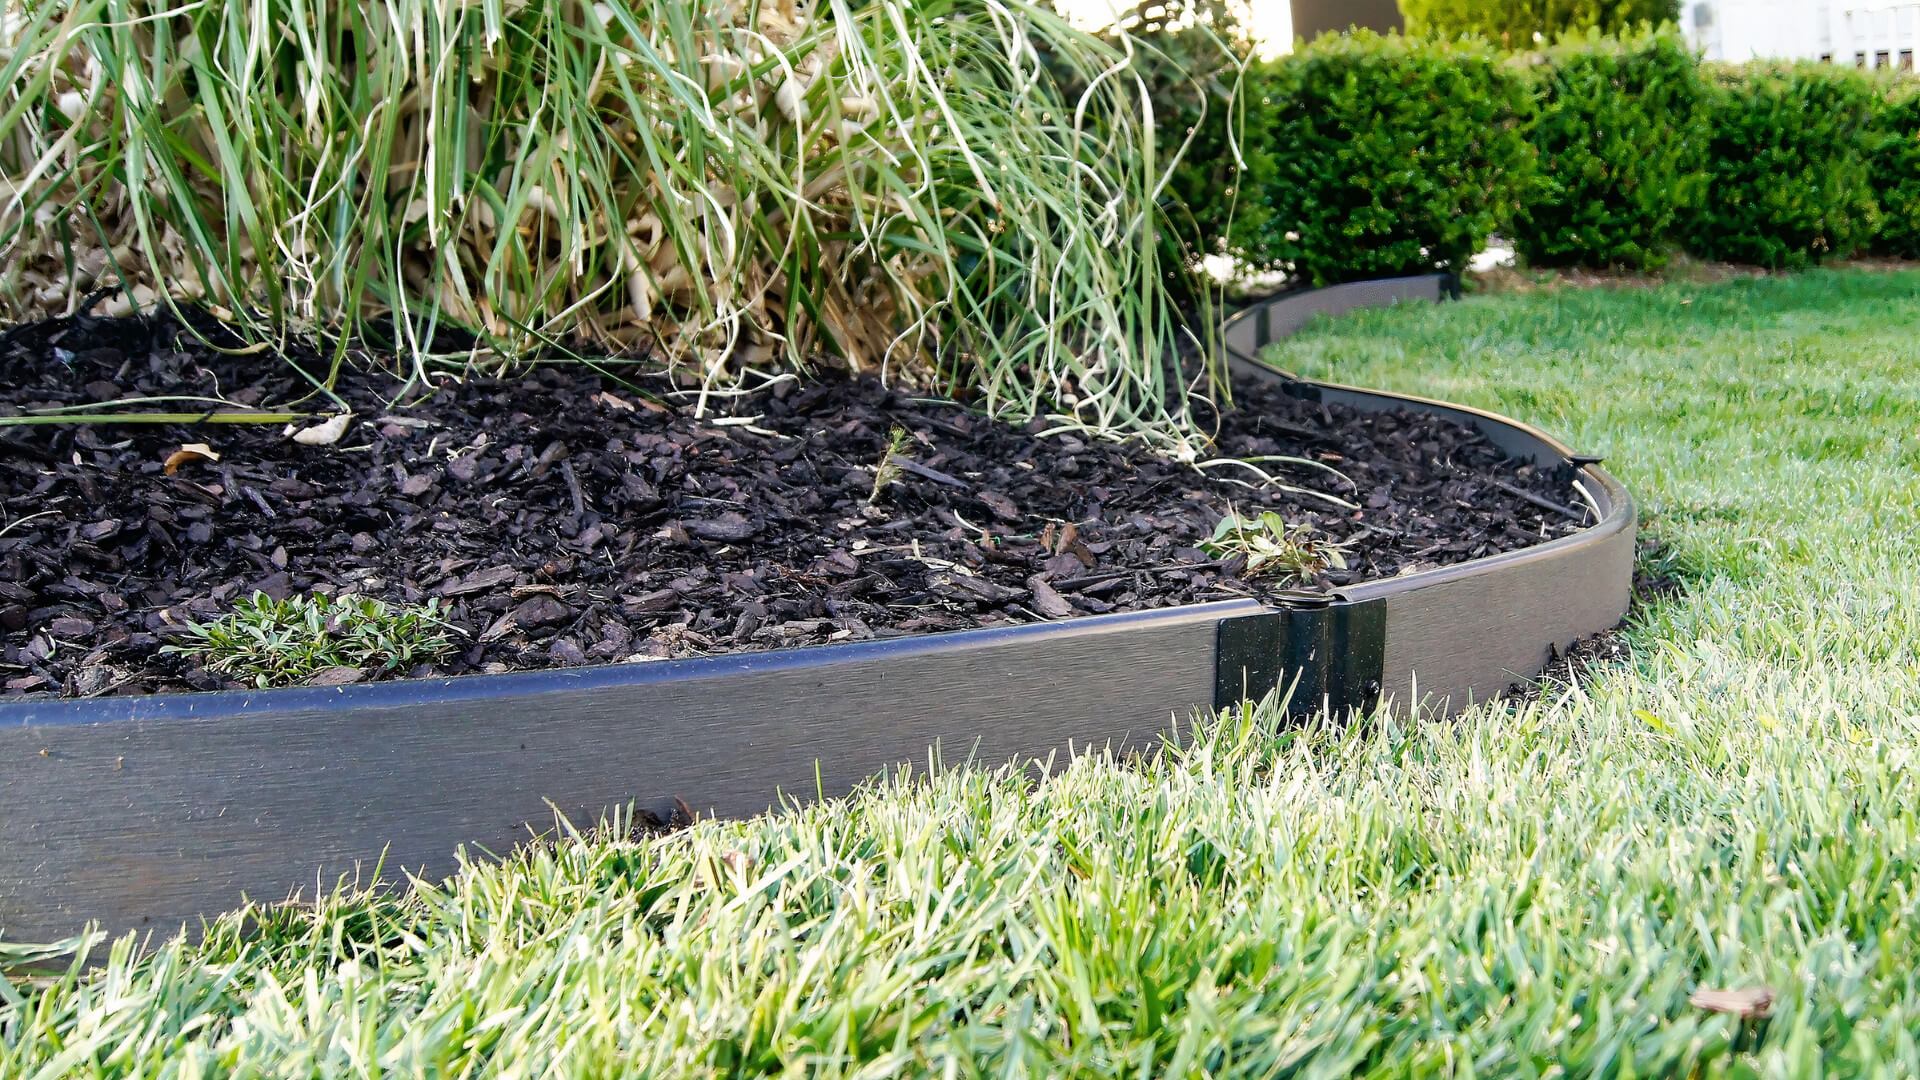 Frame It All Gardening Accessories Frame It All | Tool-Free Curved Landscape Edging Kit 32' Weathered Wood - 1" Profile 300001774